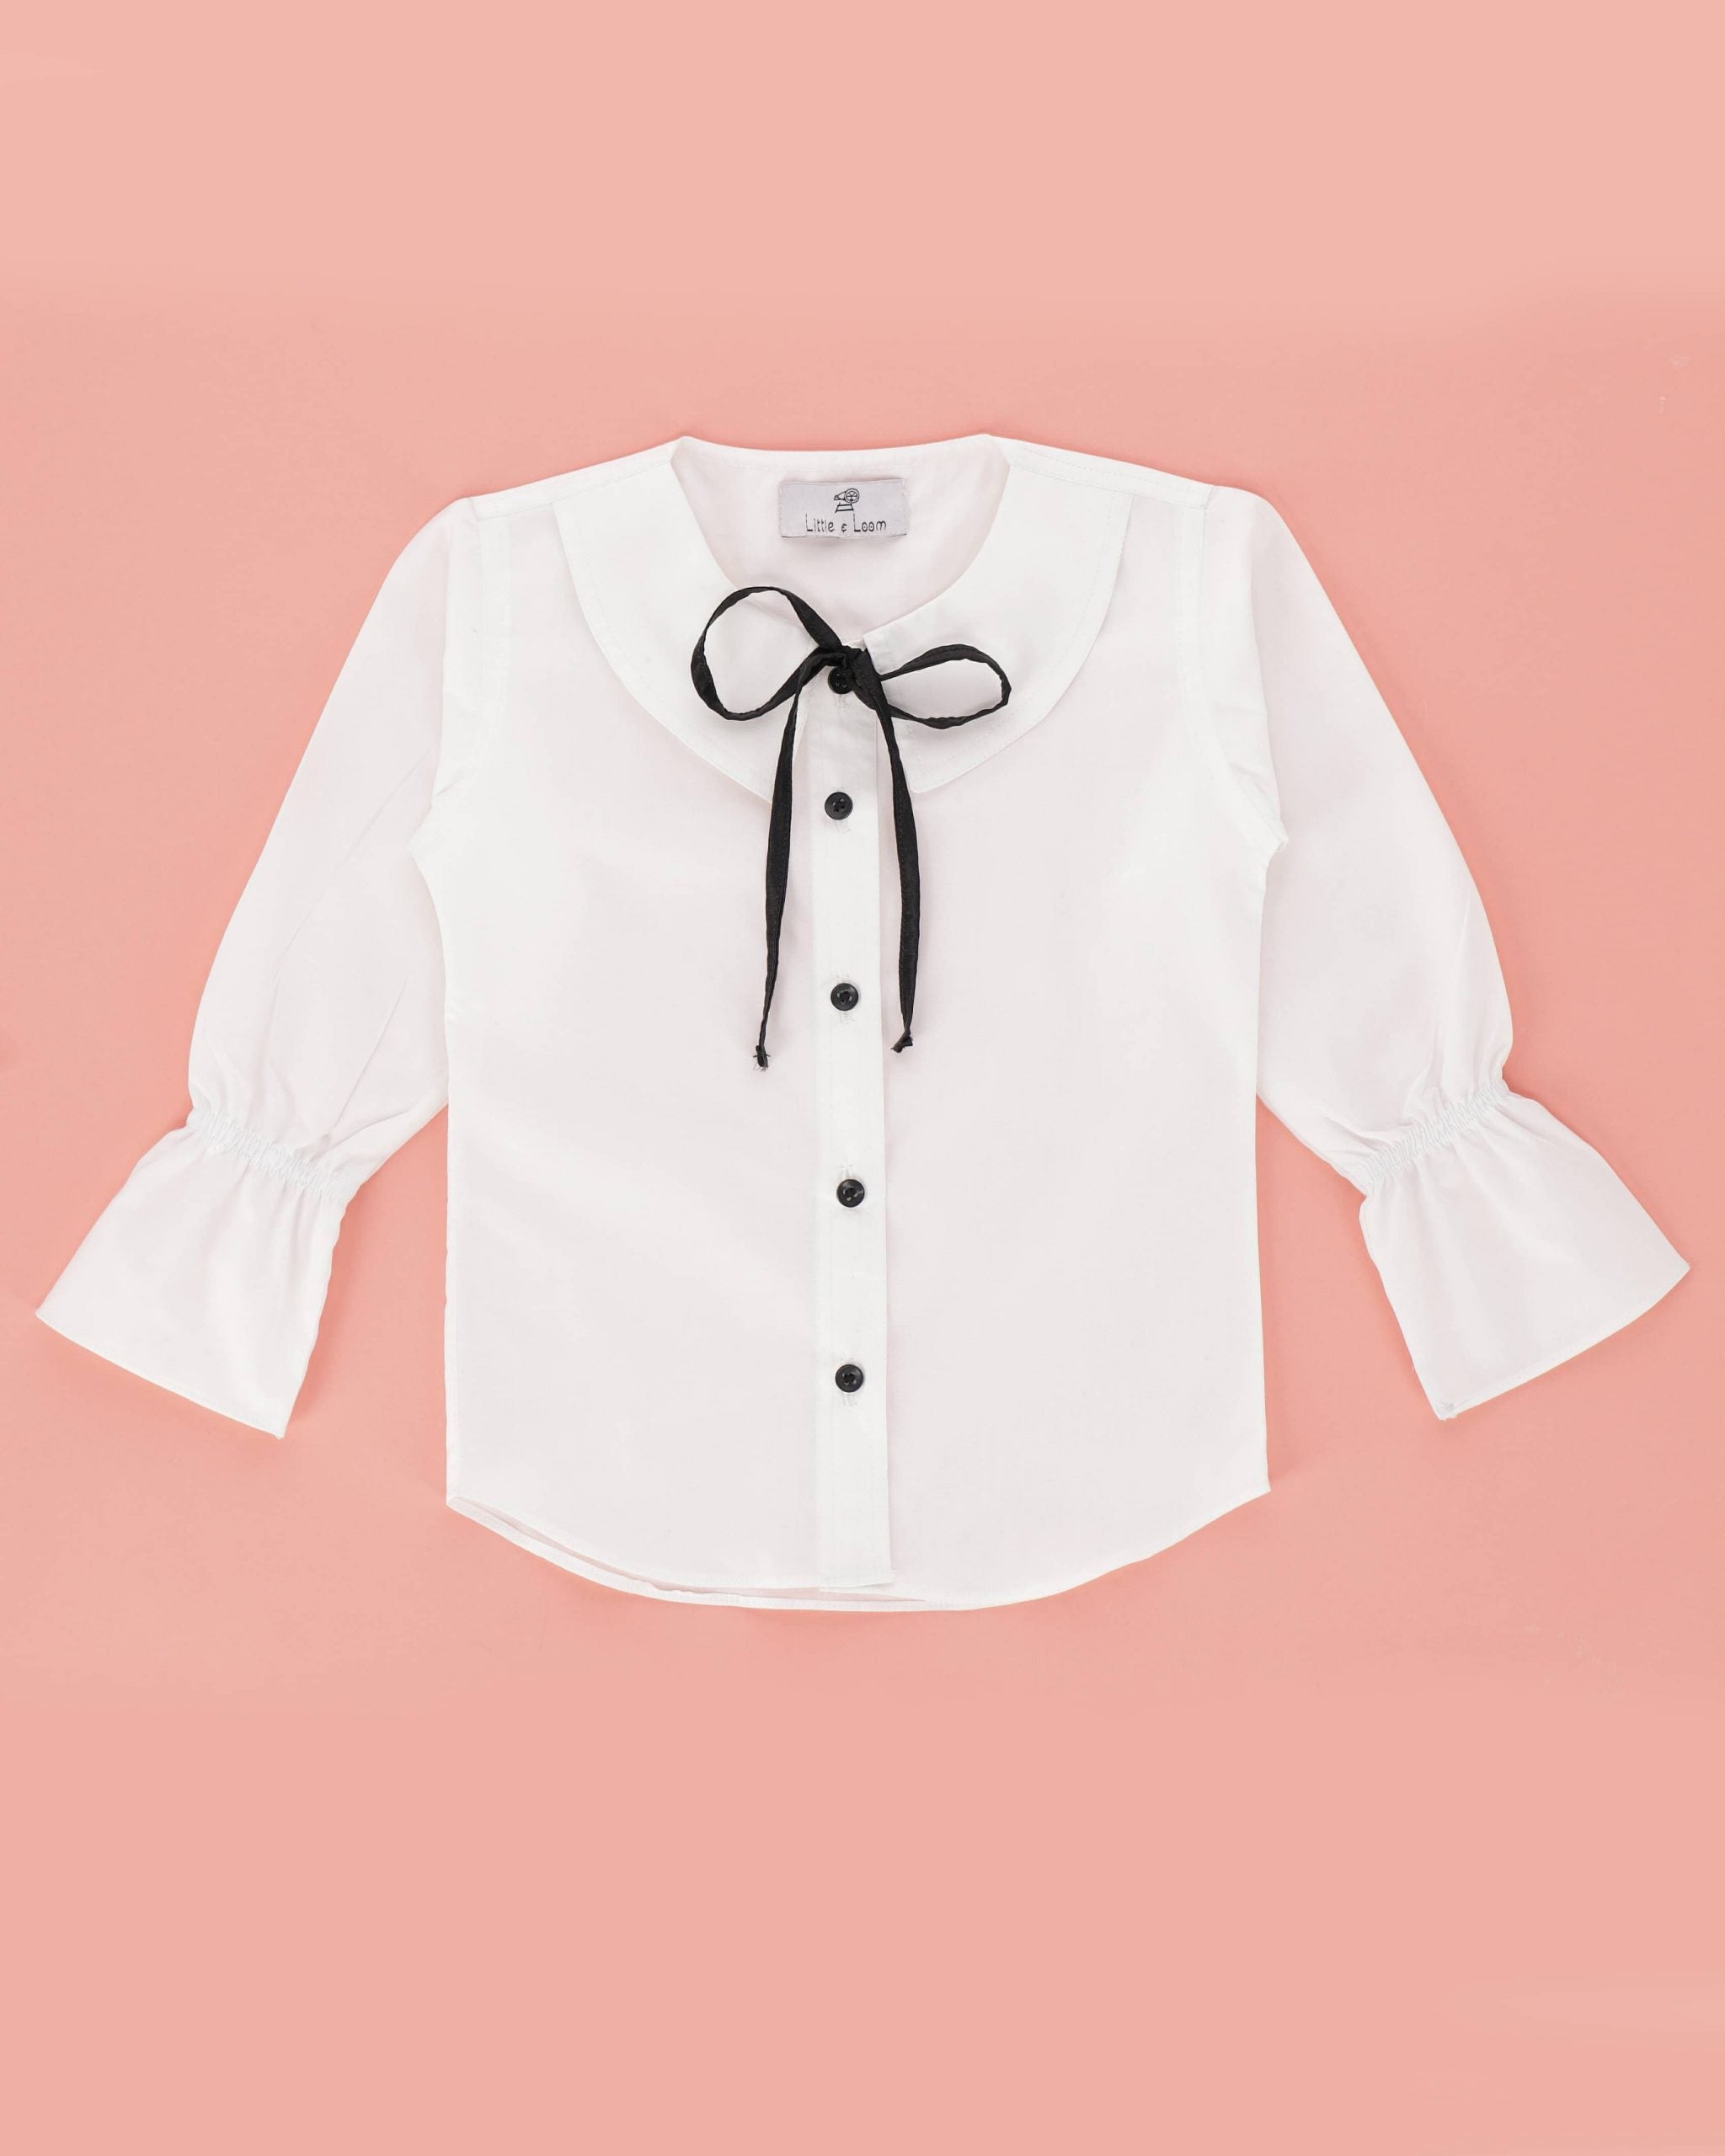 THE CLASSIC WHITE SHIRT WITH BLACK RIBBON